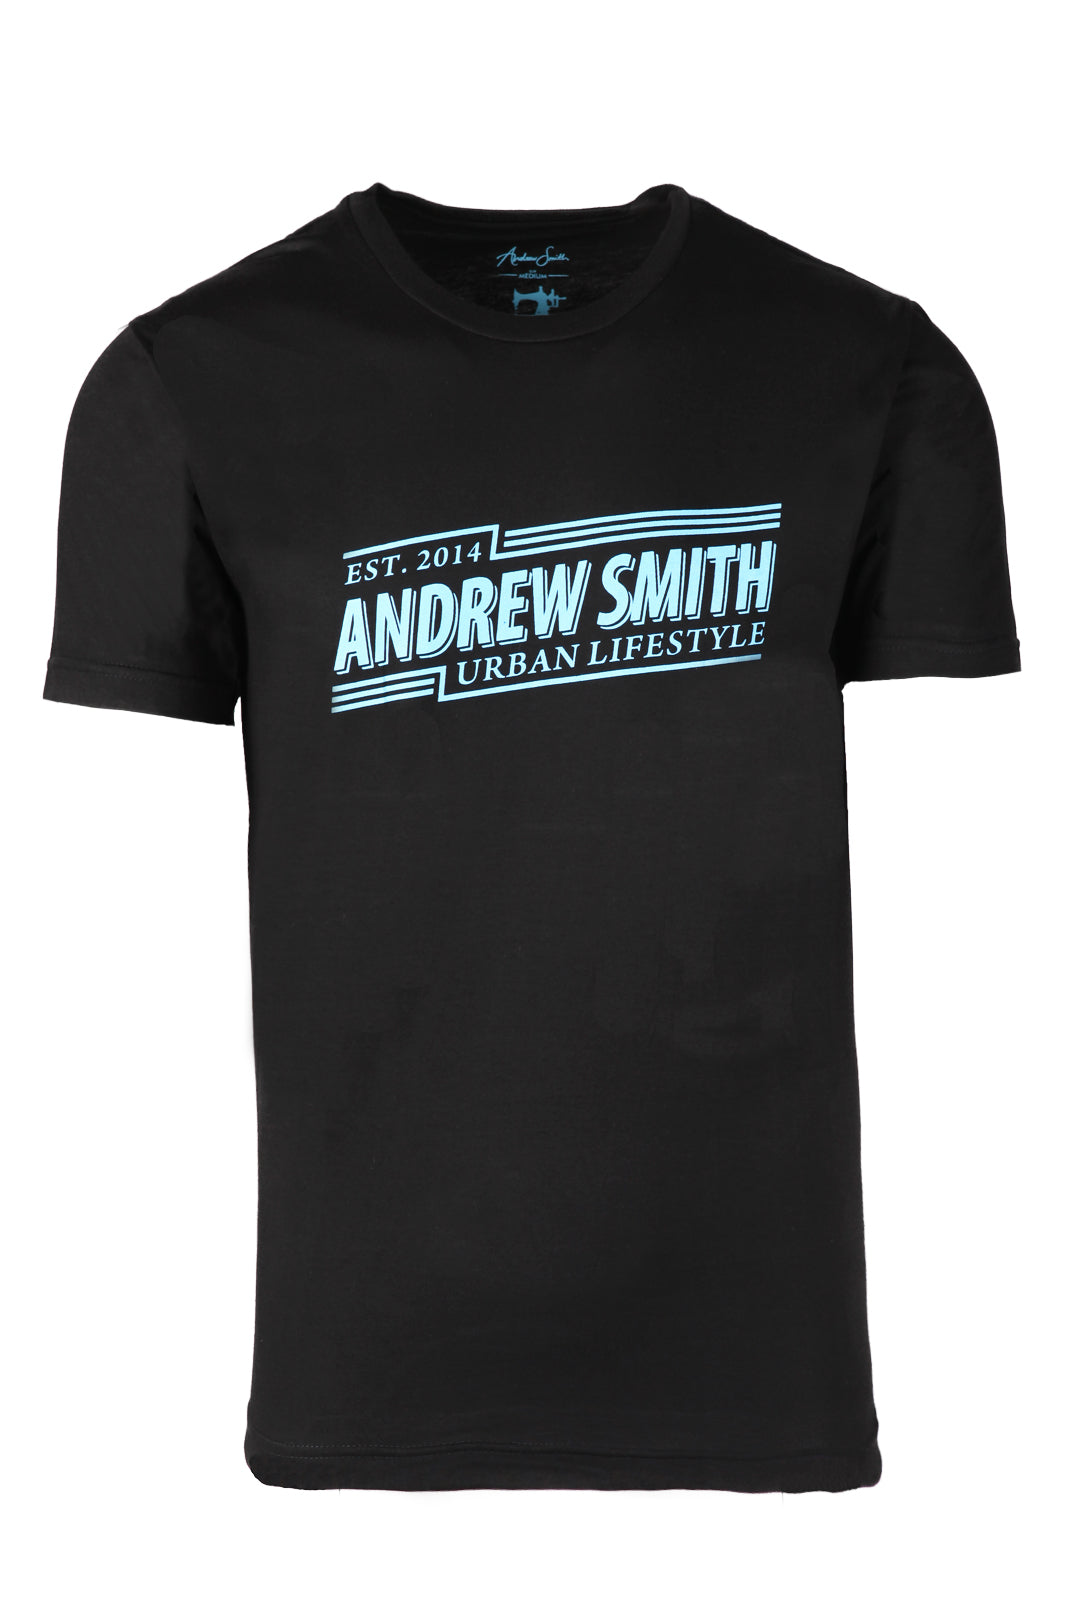 Andrew Smith T-Shirt Slim Fit Pria A0101X01A